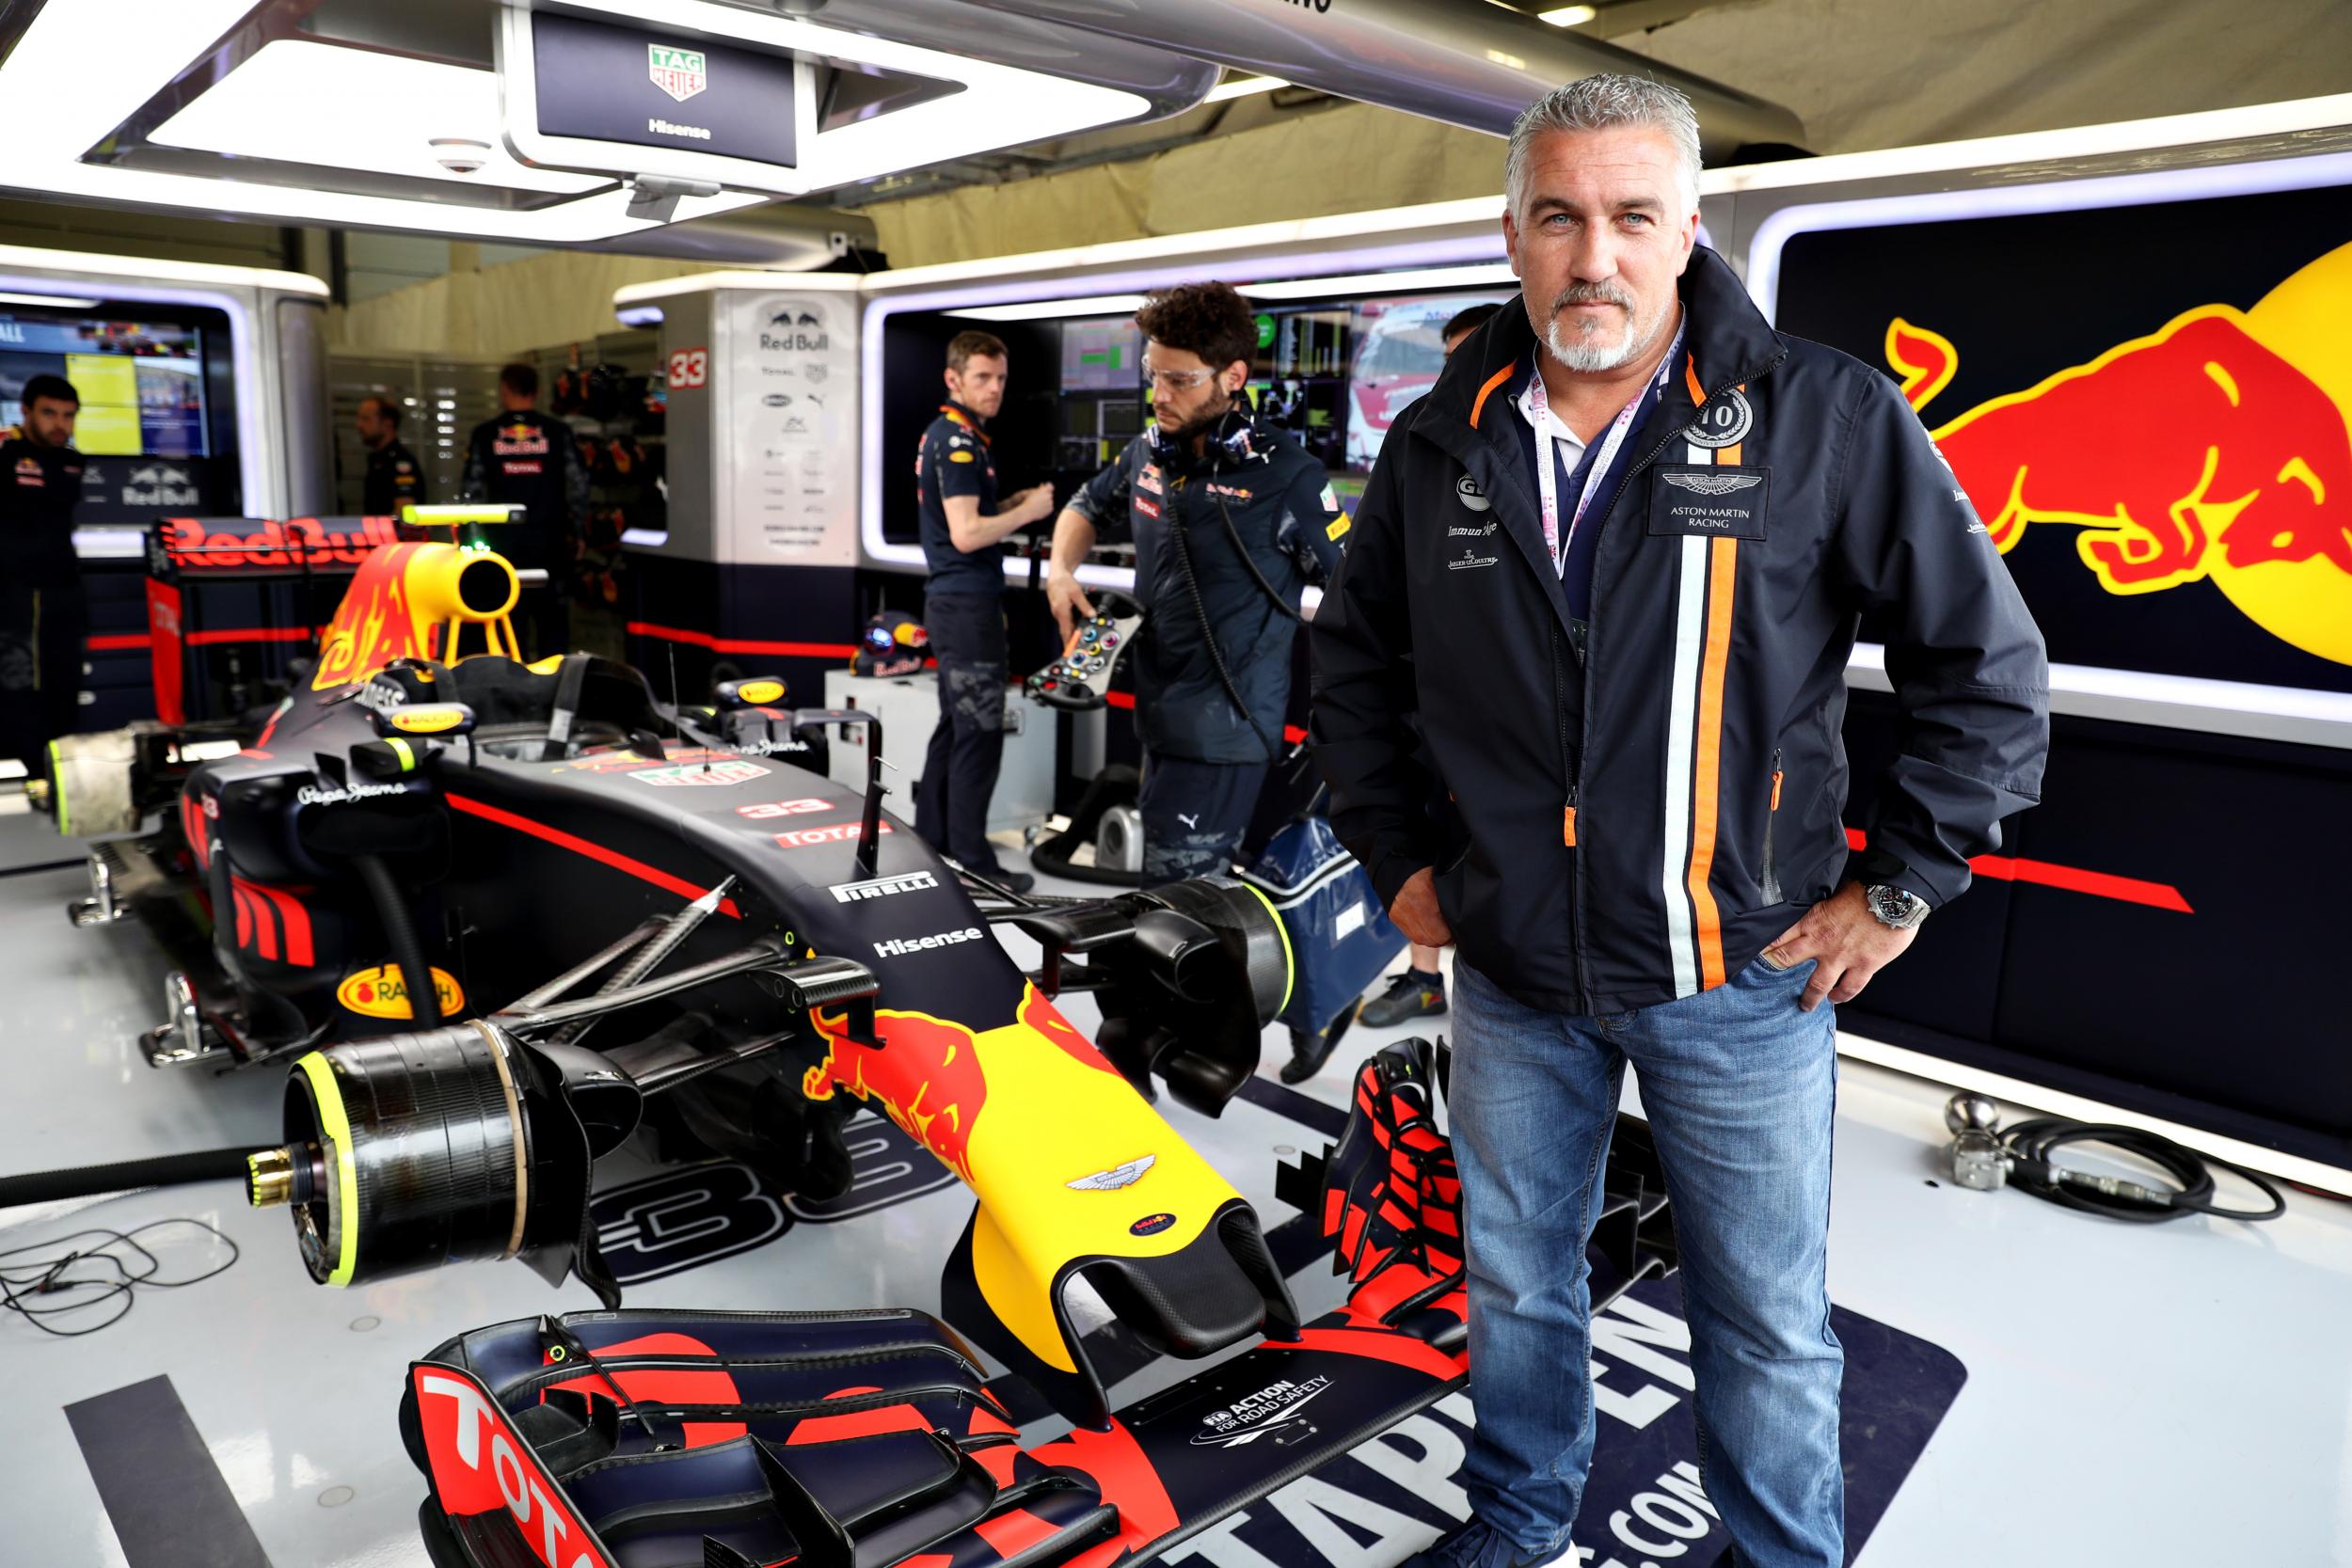 Keen racer Paul Hollywood at the Formula One Grand Prix at Silverstone